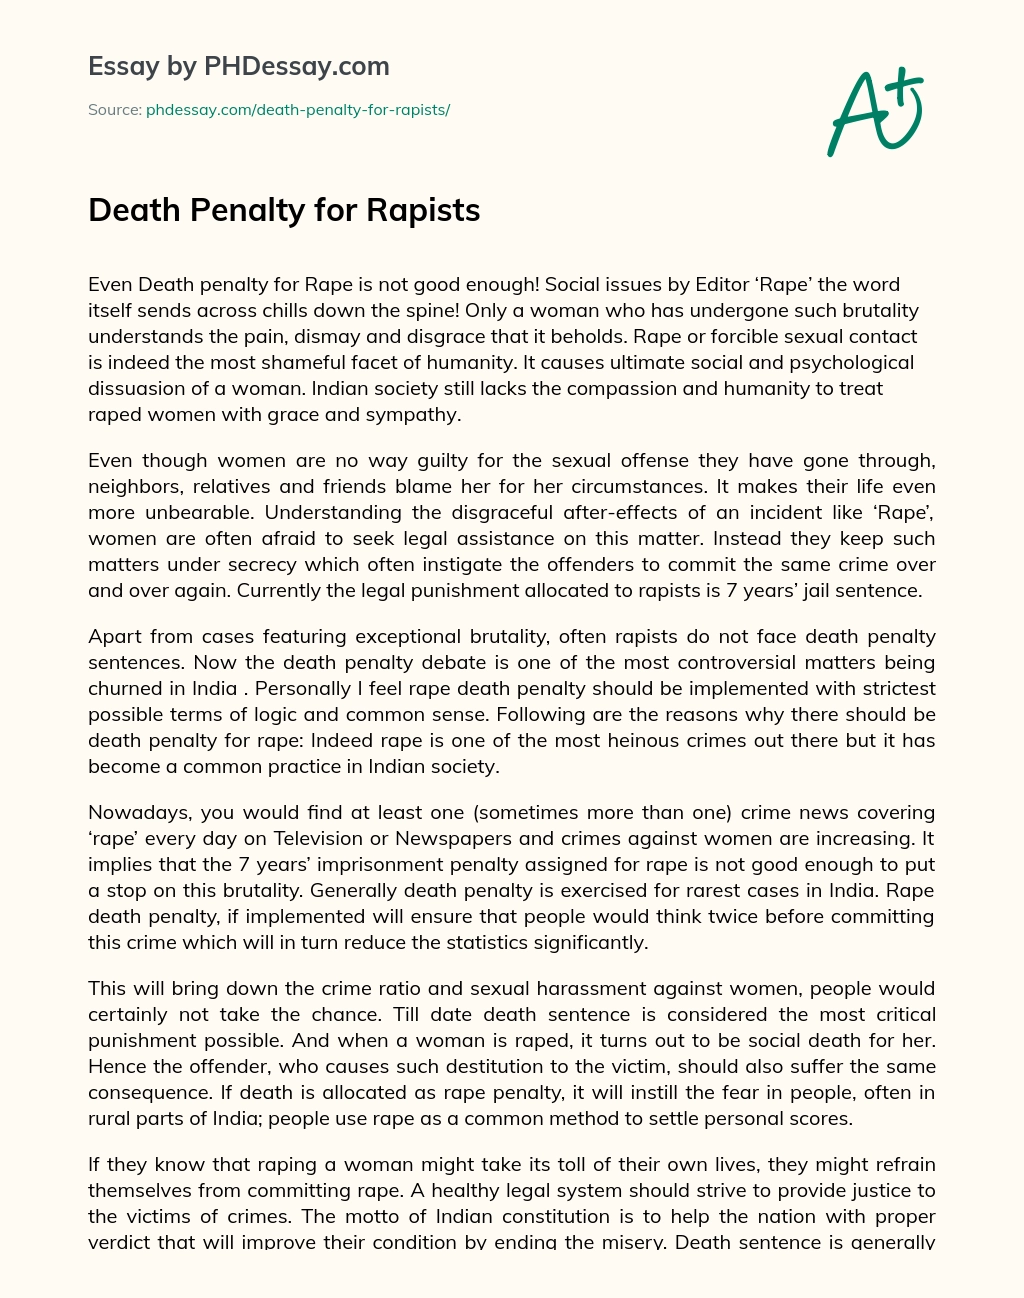 Death Penalty for Rapists essay